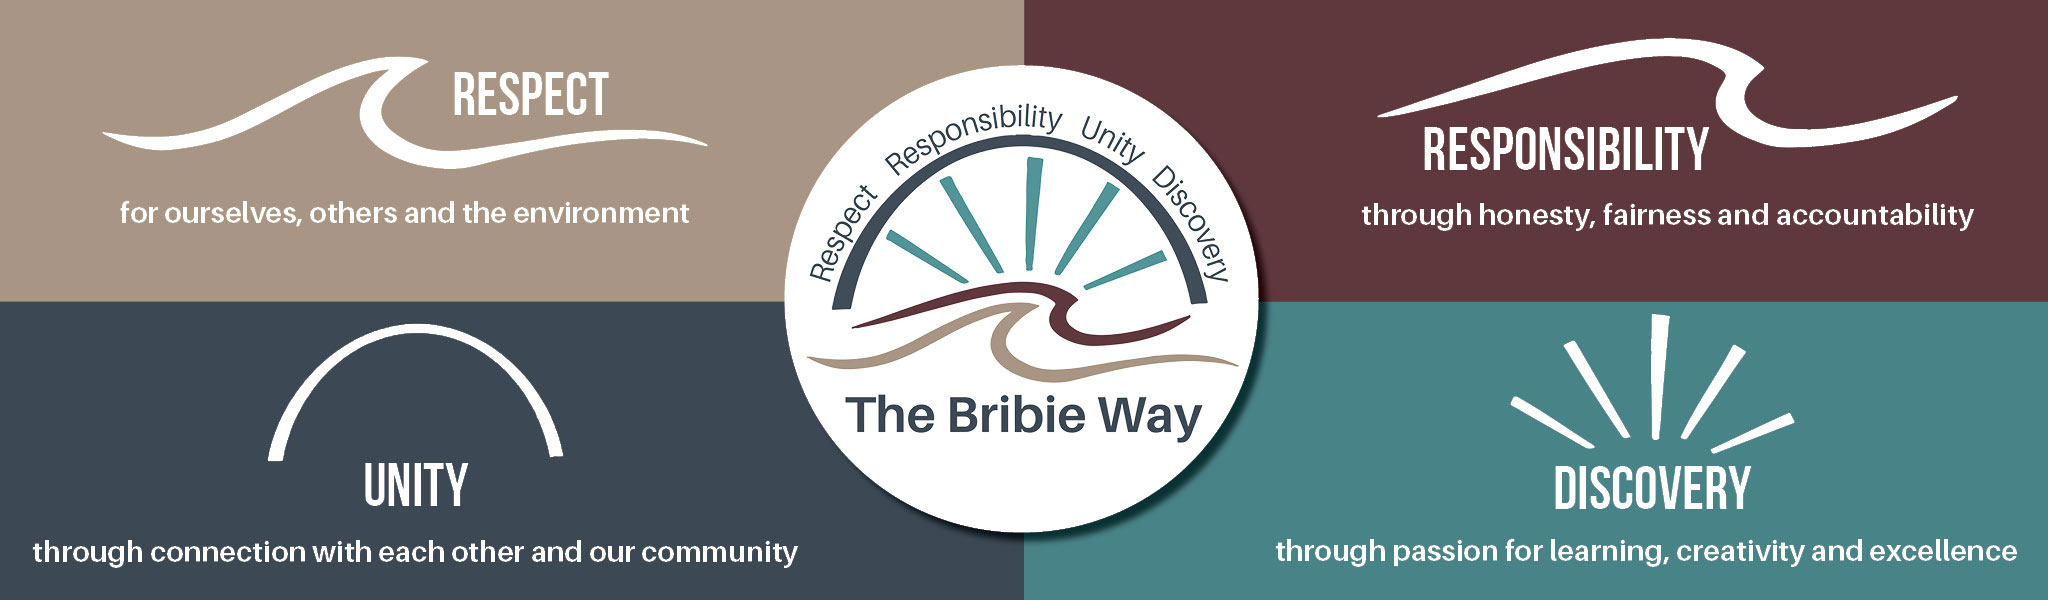 Banner that reads, The Bribie Way, Respect for ourselves, others and the environment, Unity through connection with each other and our community, Responsibility through honesty, fairness and accountability, Discovery through passion for learning, creativity and excellence